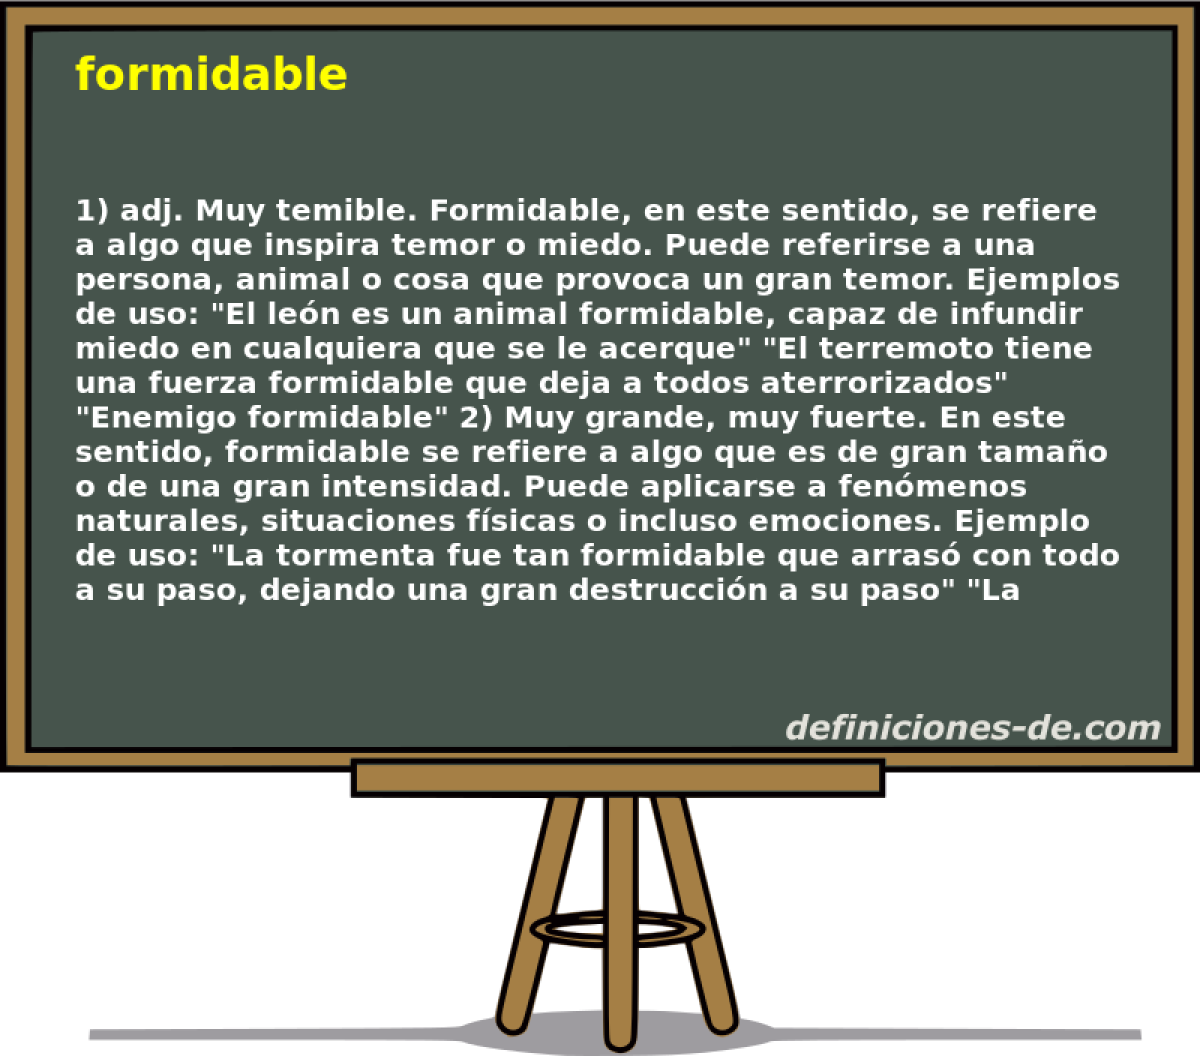 formidable 